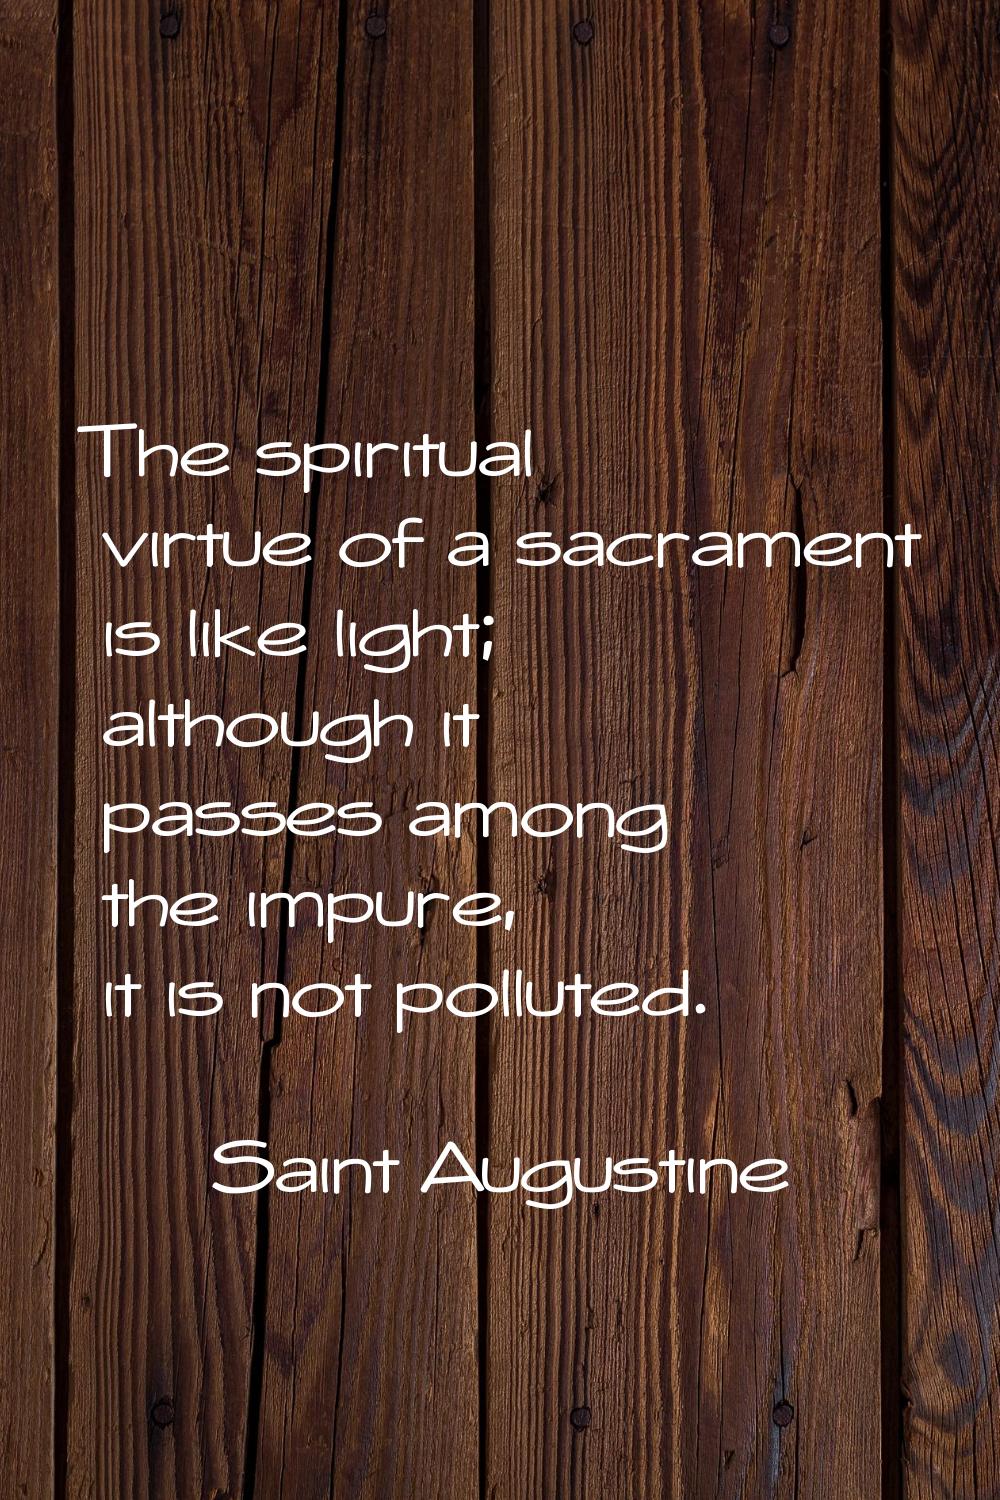 The spiritual virtue of a sacrament is like light; although it passes among the impure, it is not p